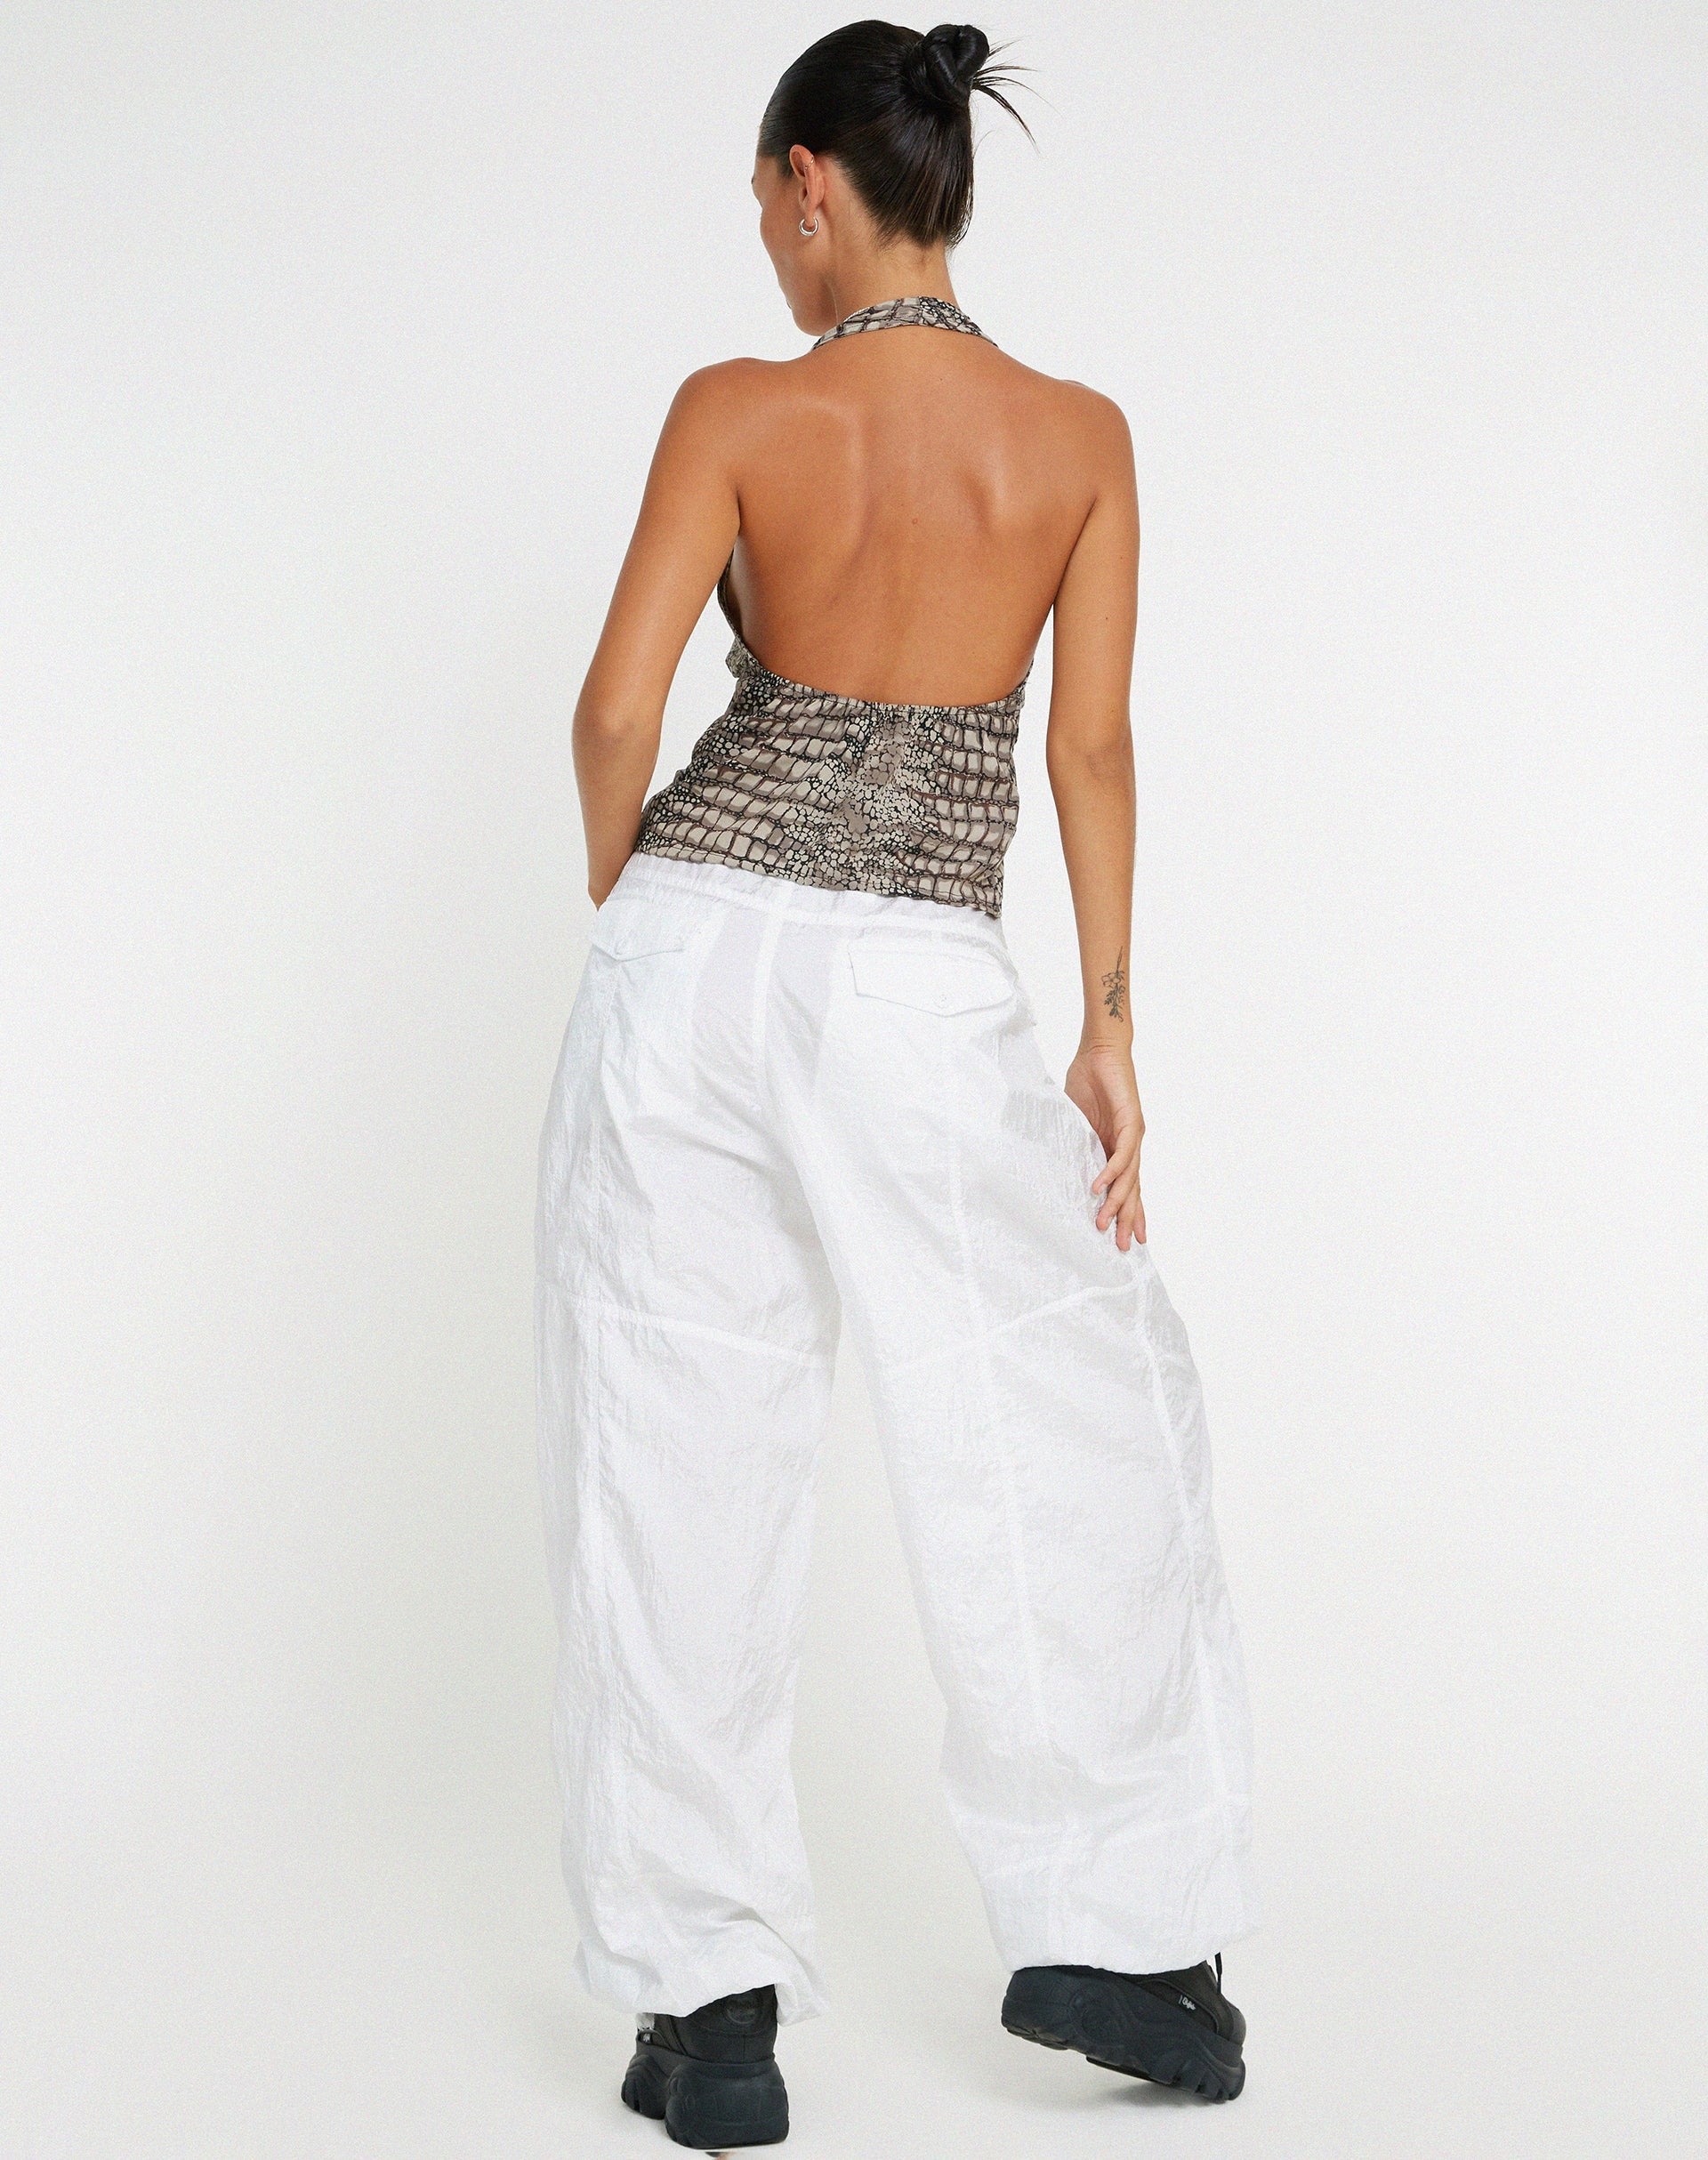 image of Roula Halter Top in Croc Neutral Grey